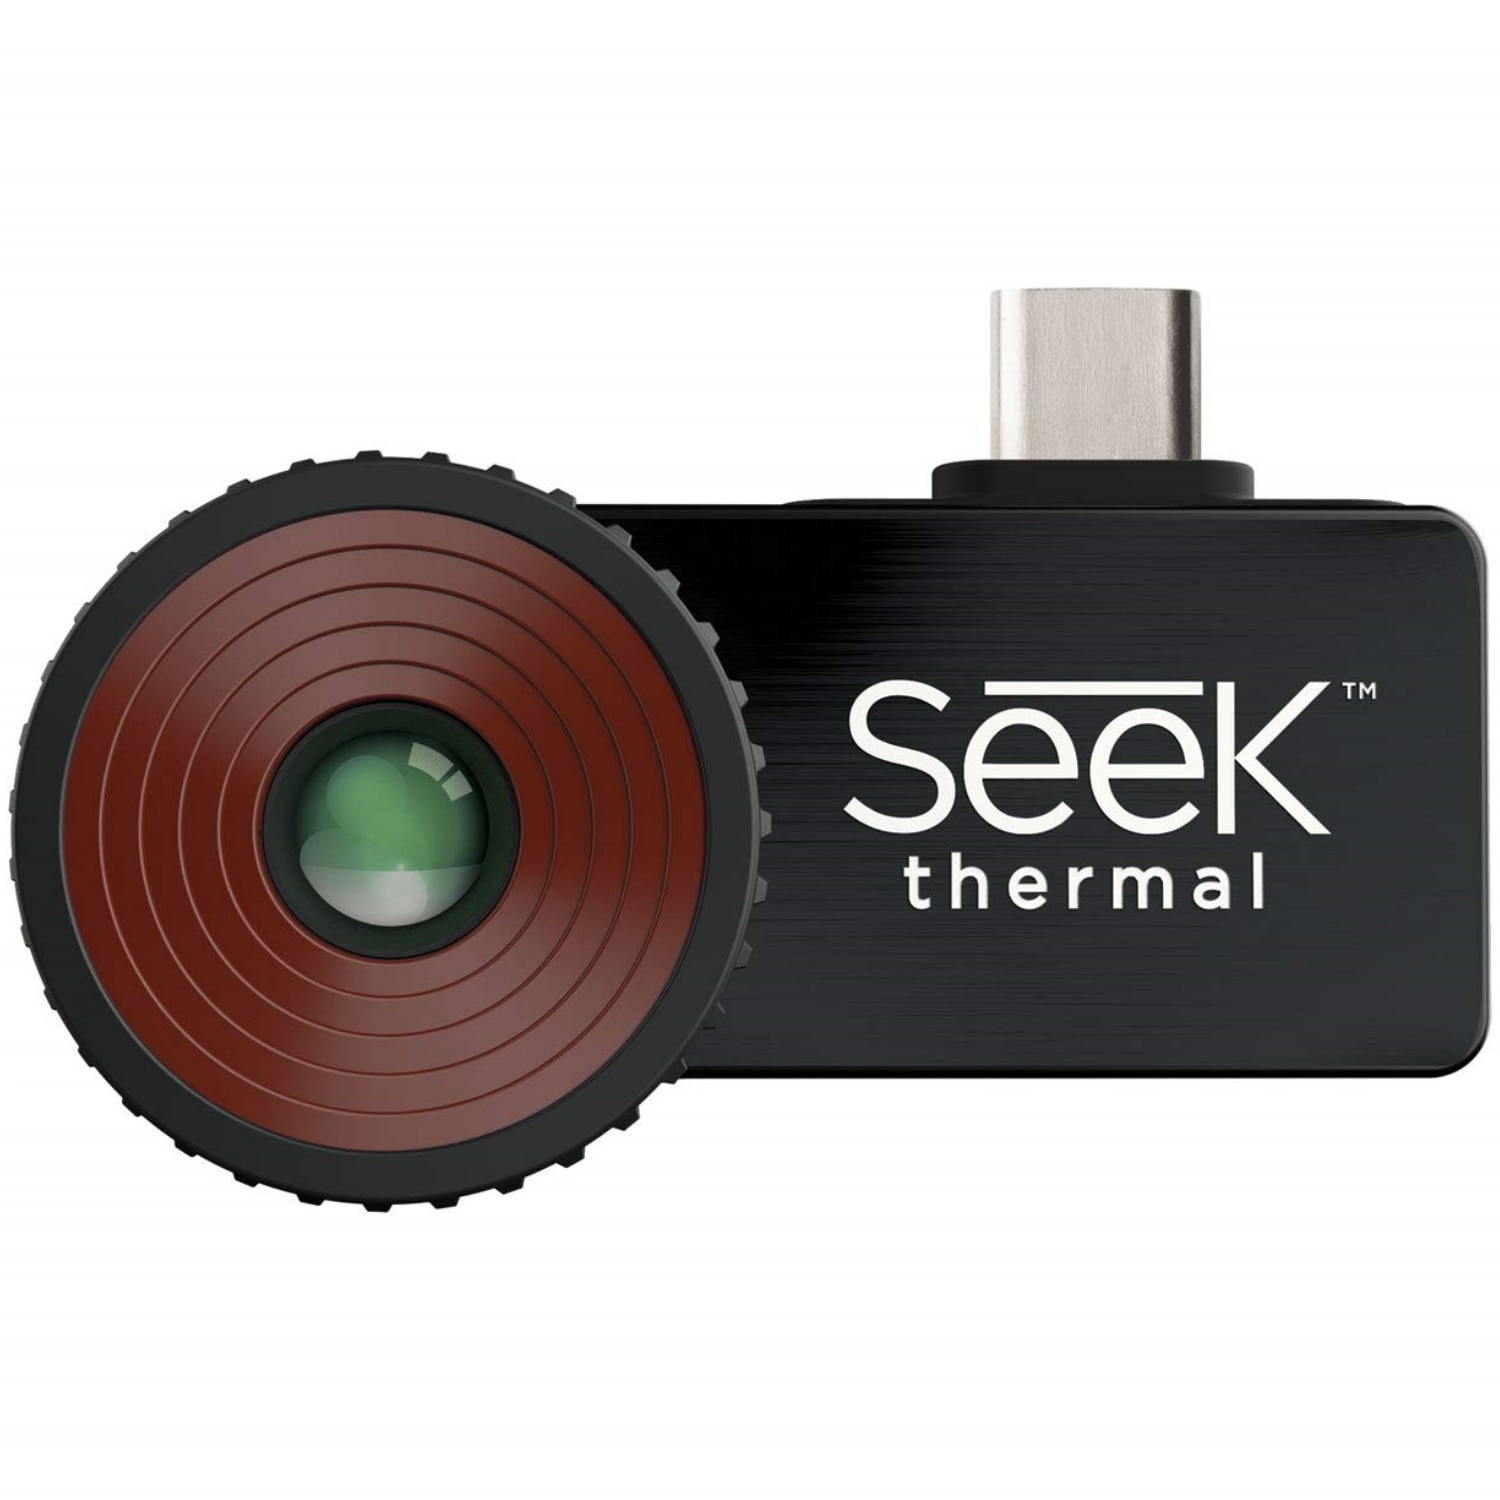 Seek Thermal Compact PRO | Our complete review.